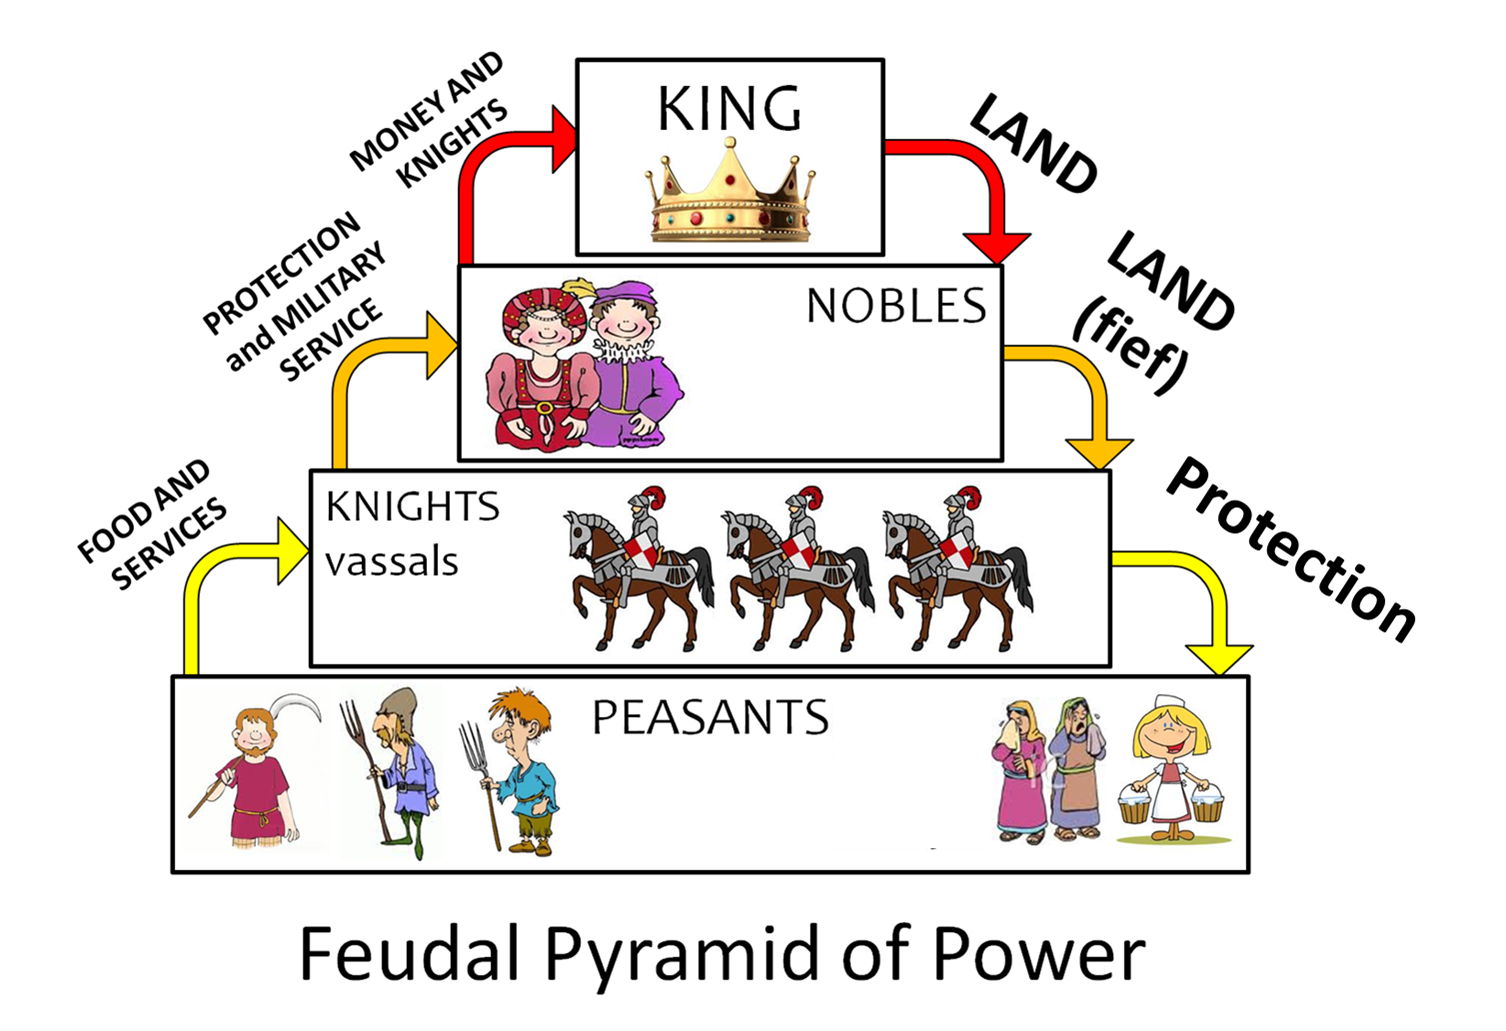 Feudalism in the medieval society